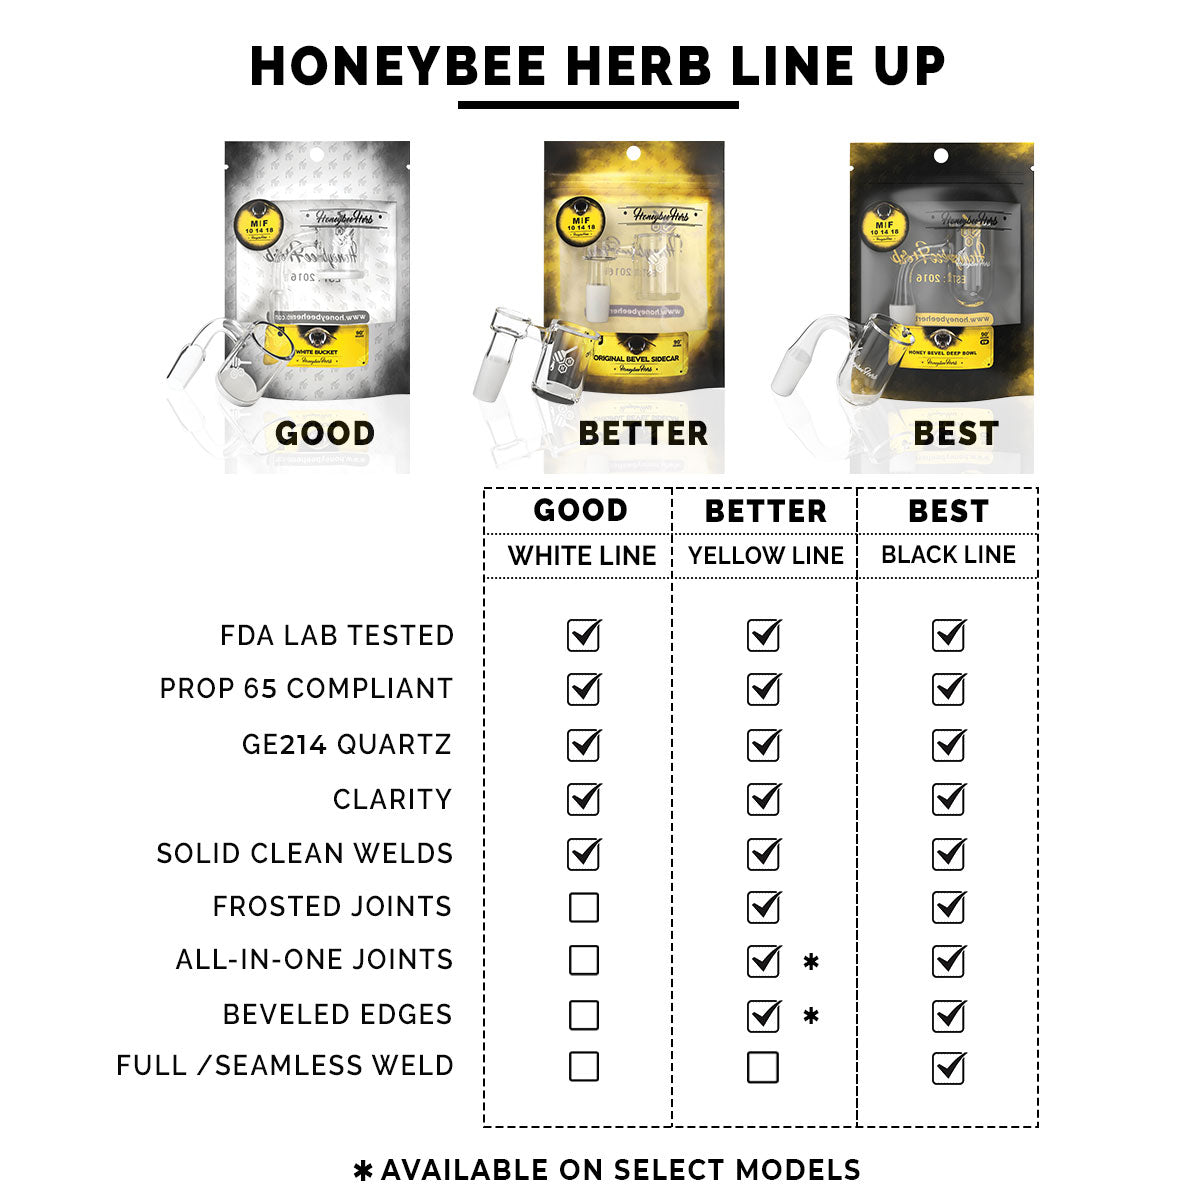 Honeybee Herb bubble quartz banger comparison chart, featuring quality tiers and product features.